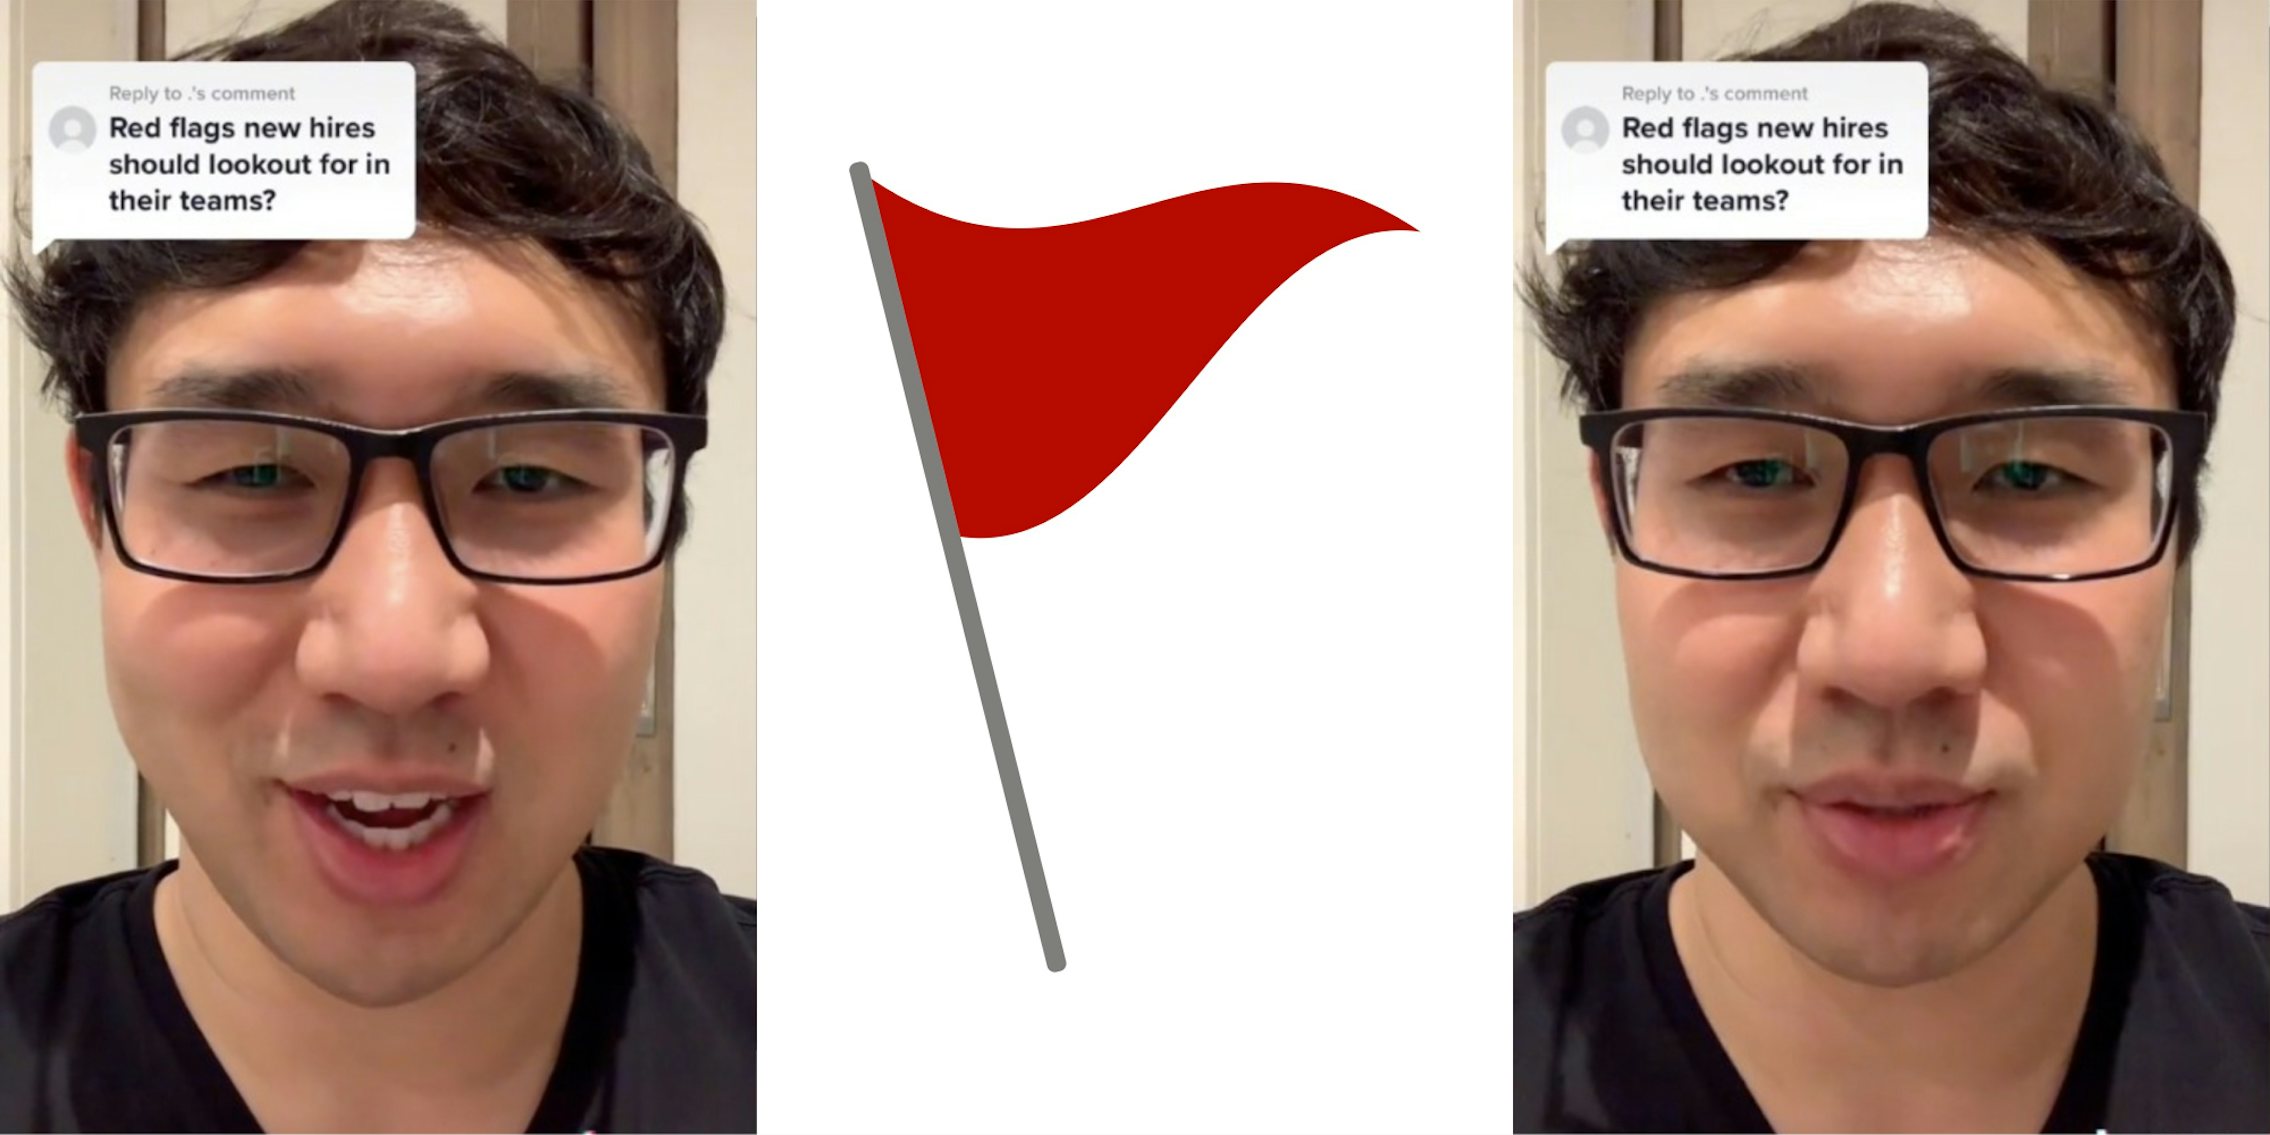 man talks about red flags for new hires tiktok